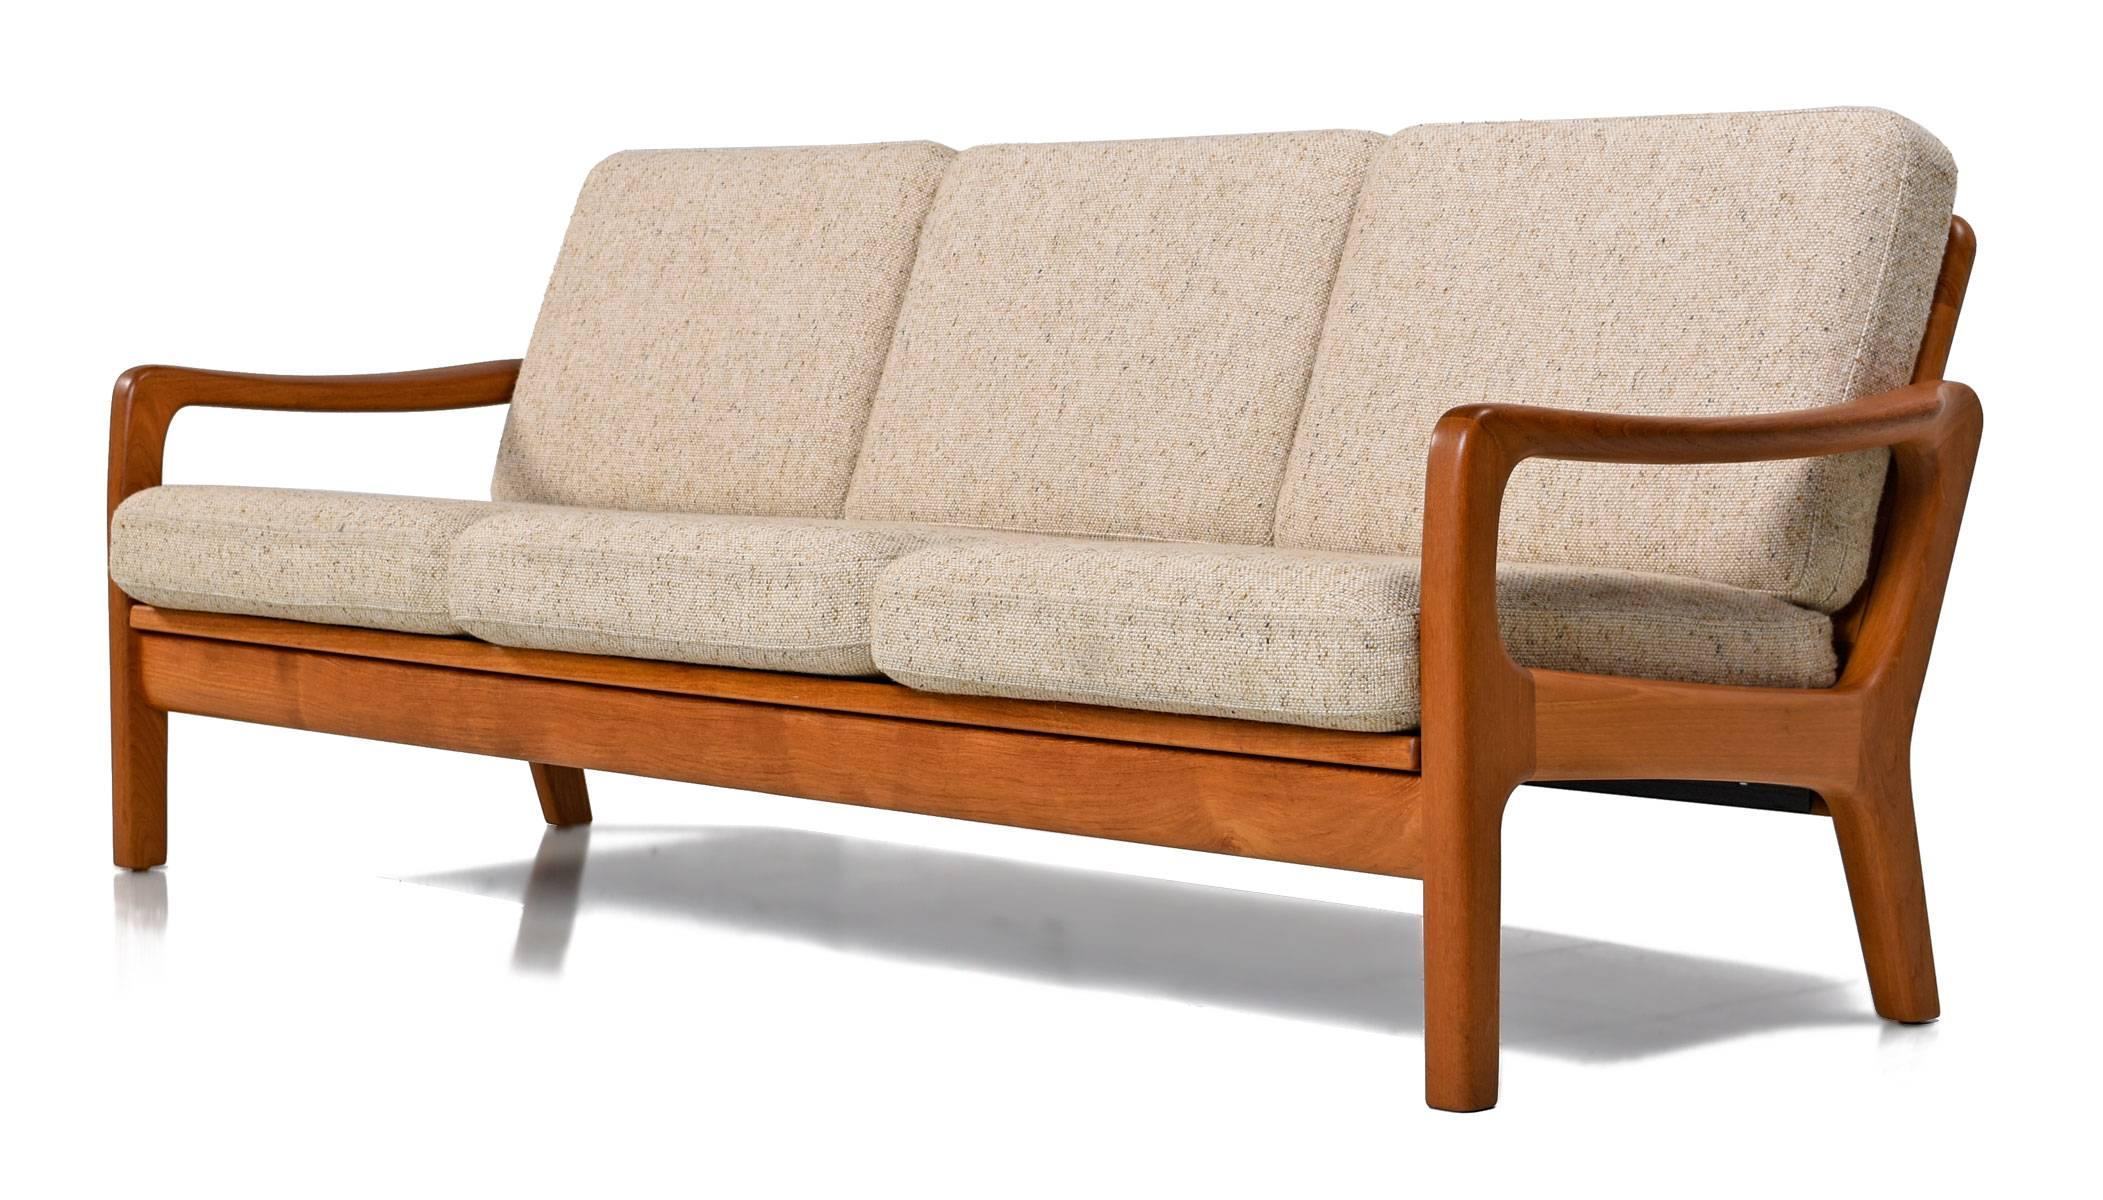 The sculpted arms stand out within the sleek, Minimalist, modern, low profile design. Solid teak frame with rigid construction. Cushions, fabric and springs are in near mint condition. Sofa folds down flat to become a daybed. Two hinged legs can